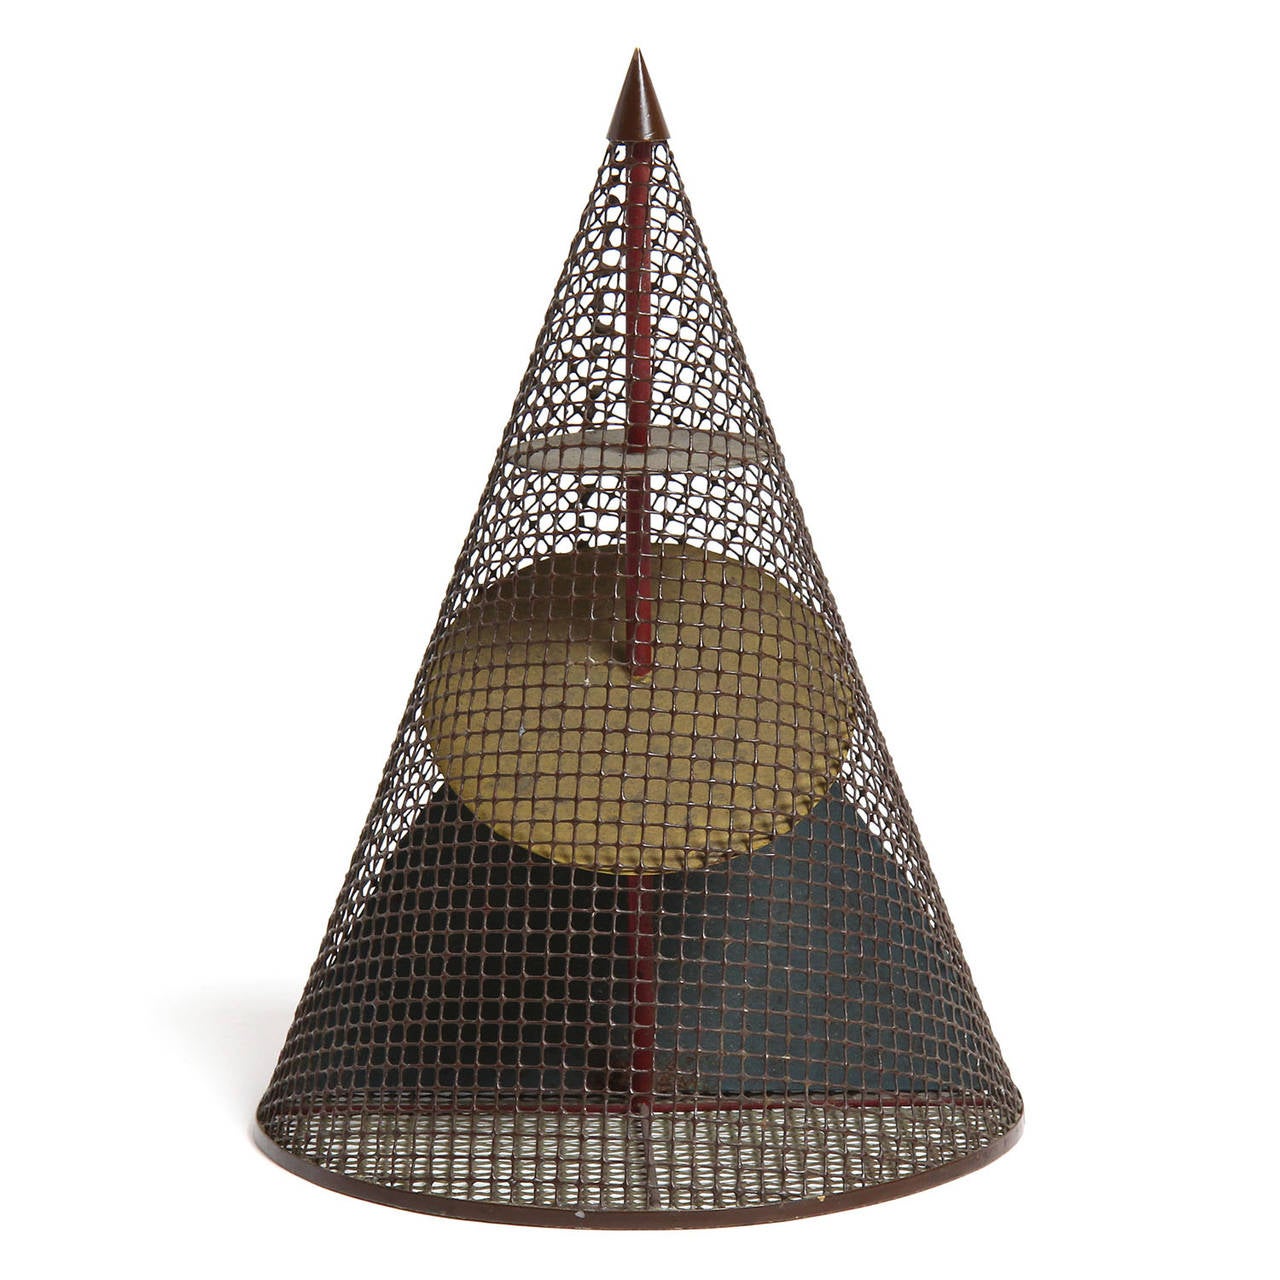 American Conical Metal Sculpture For Sale